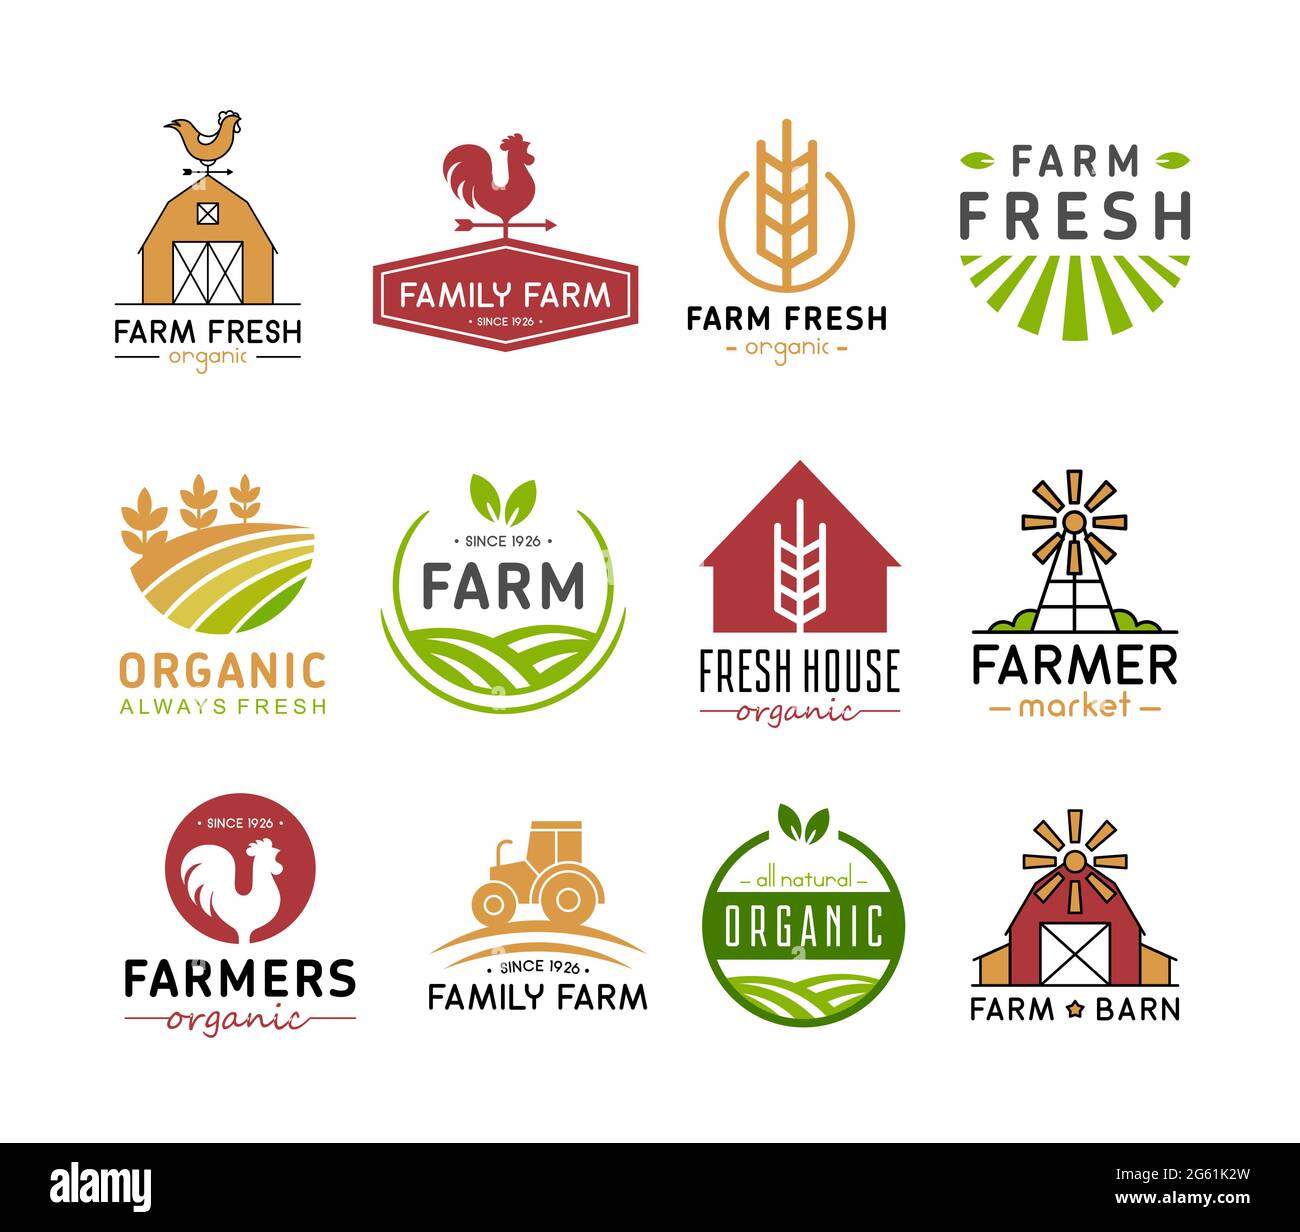 Farm logo icons vector illustration, flat logotype or badge design set with eco fresh organic products food for farmer market, labels for agriculture Stock Vector